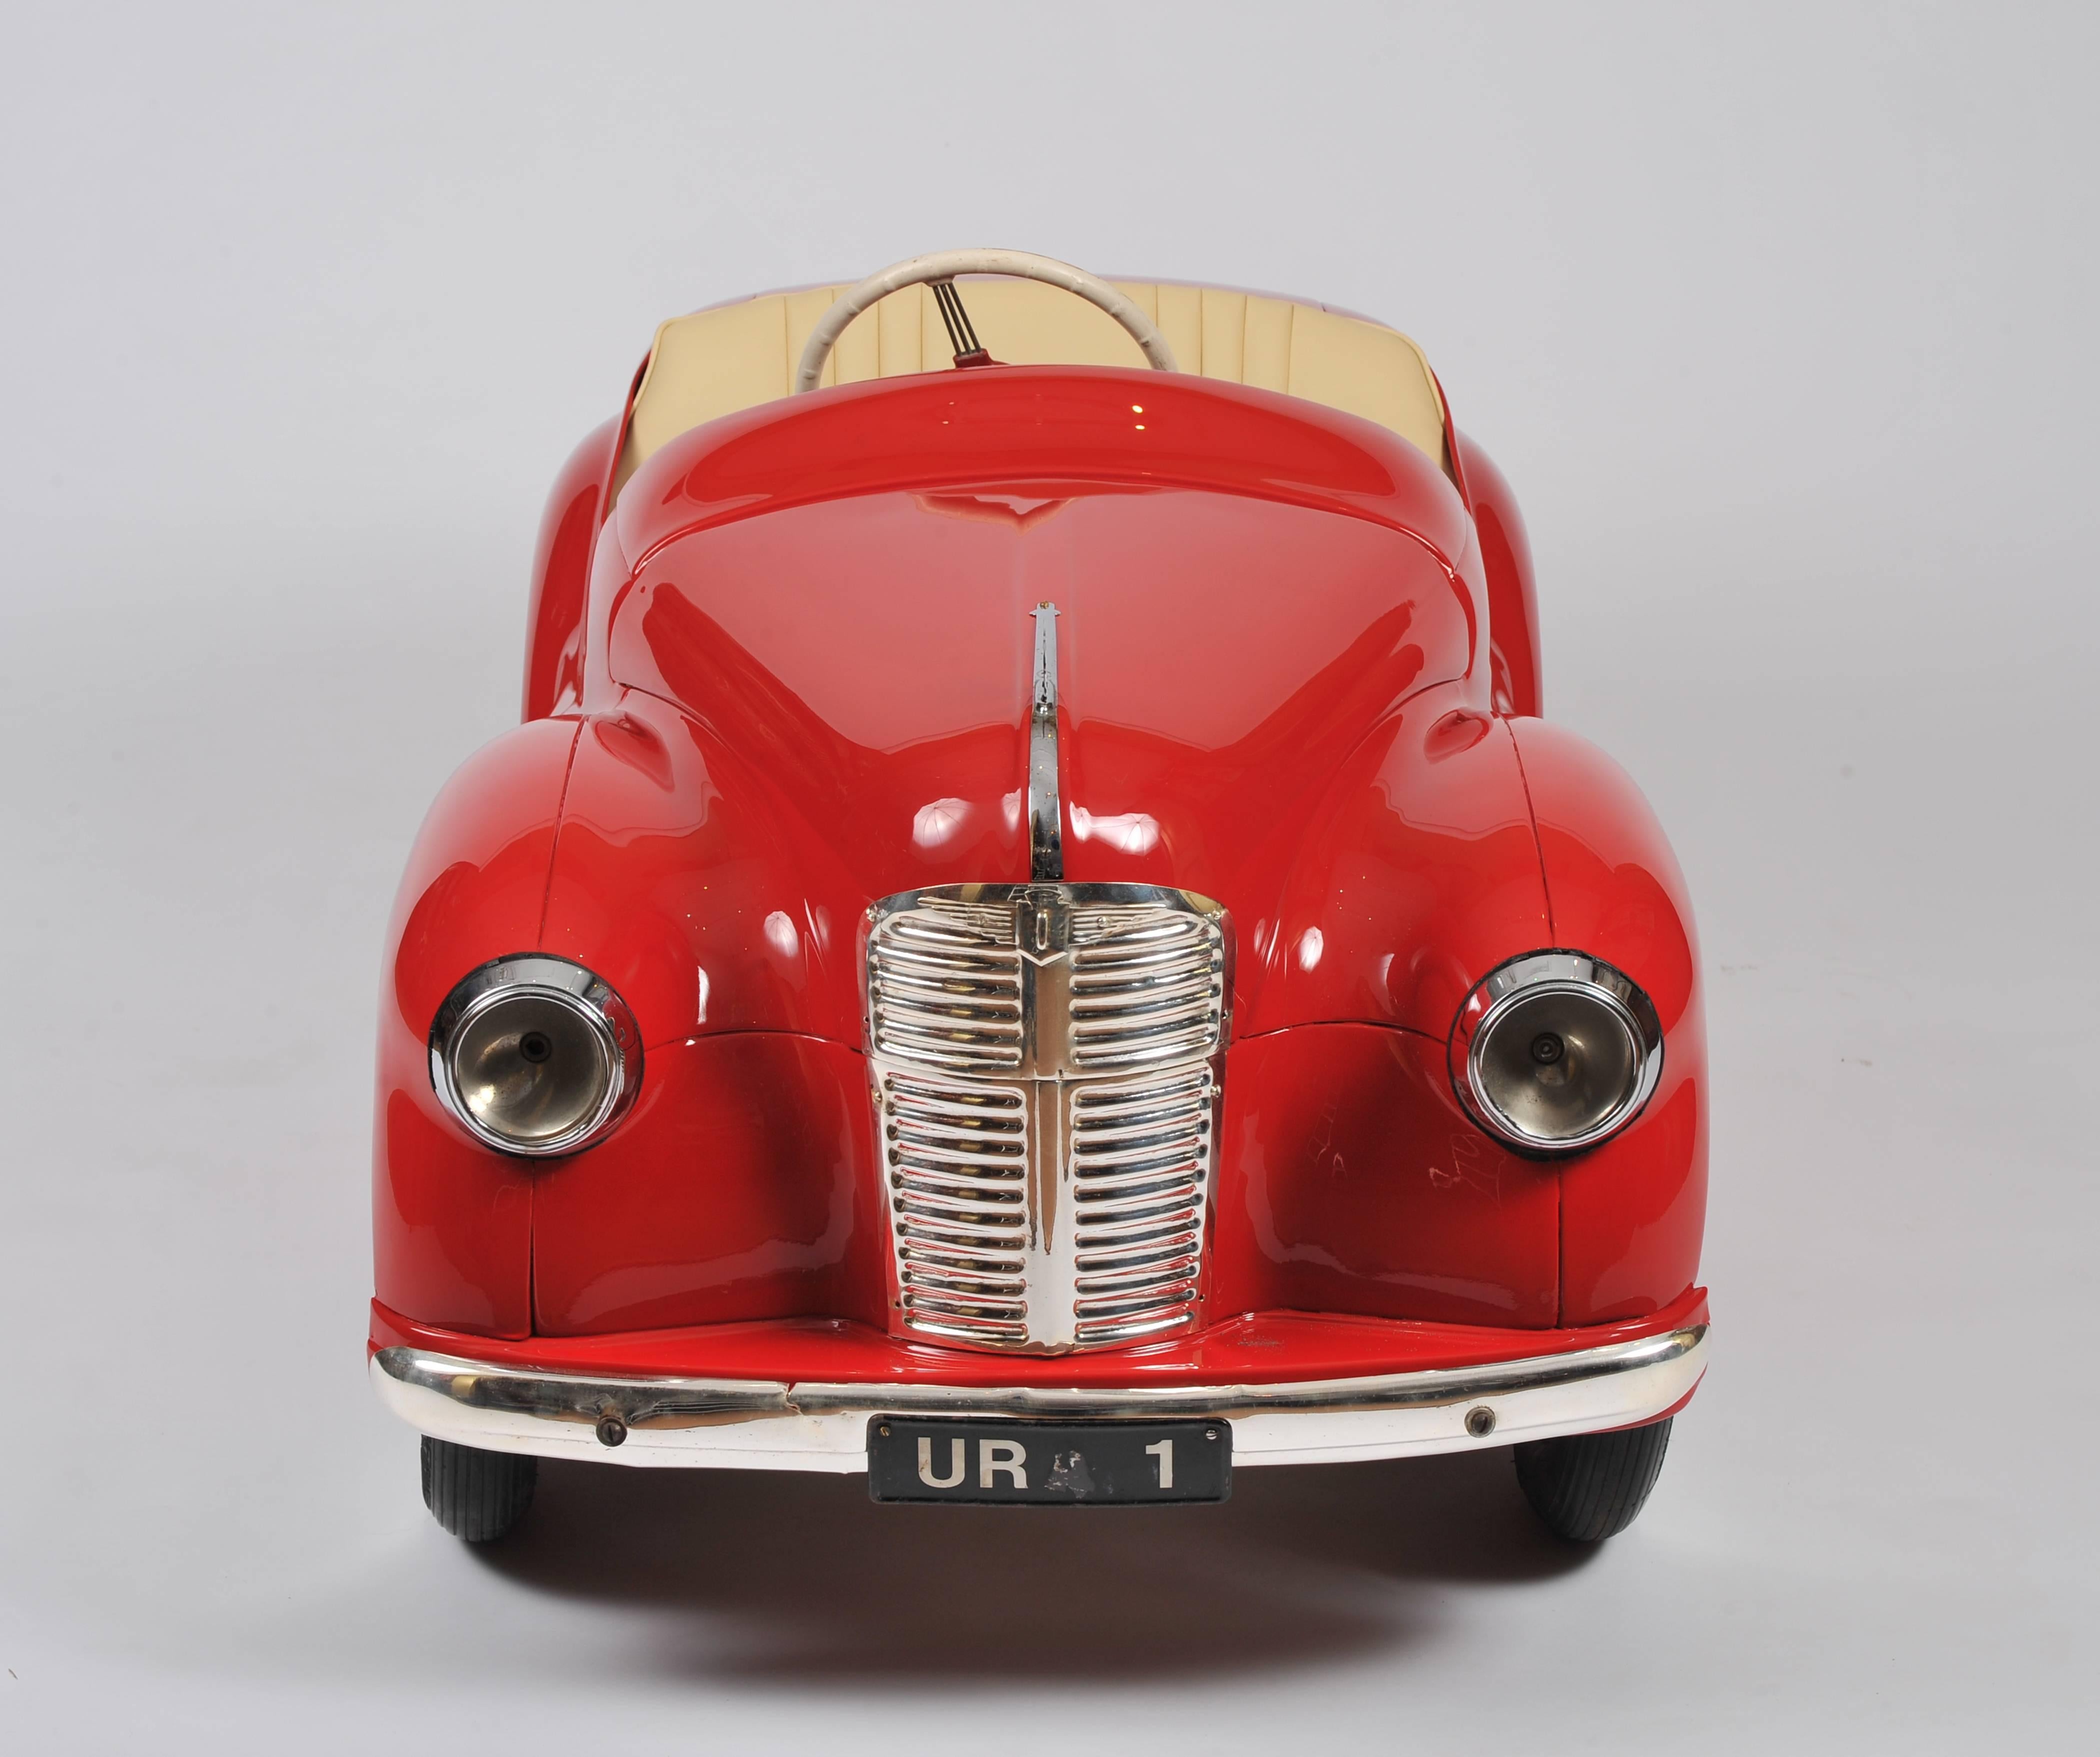 This superb and absolutely gorgeous child’s pedal car in the form of an Austin J40 is a numbered limited edition, and restored in full working order. This child’s pedal car is a model of a Classic car, with working horn and lights and numerically